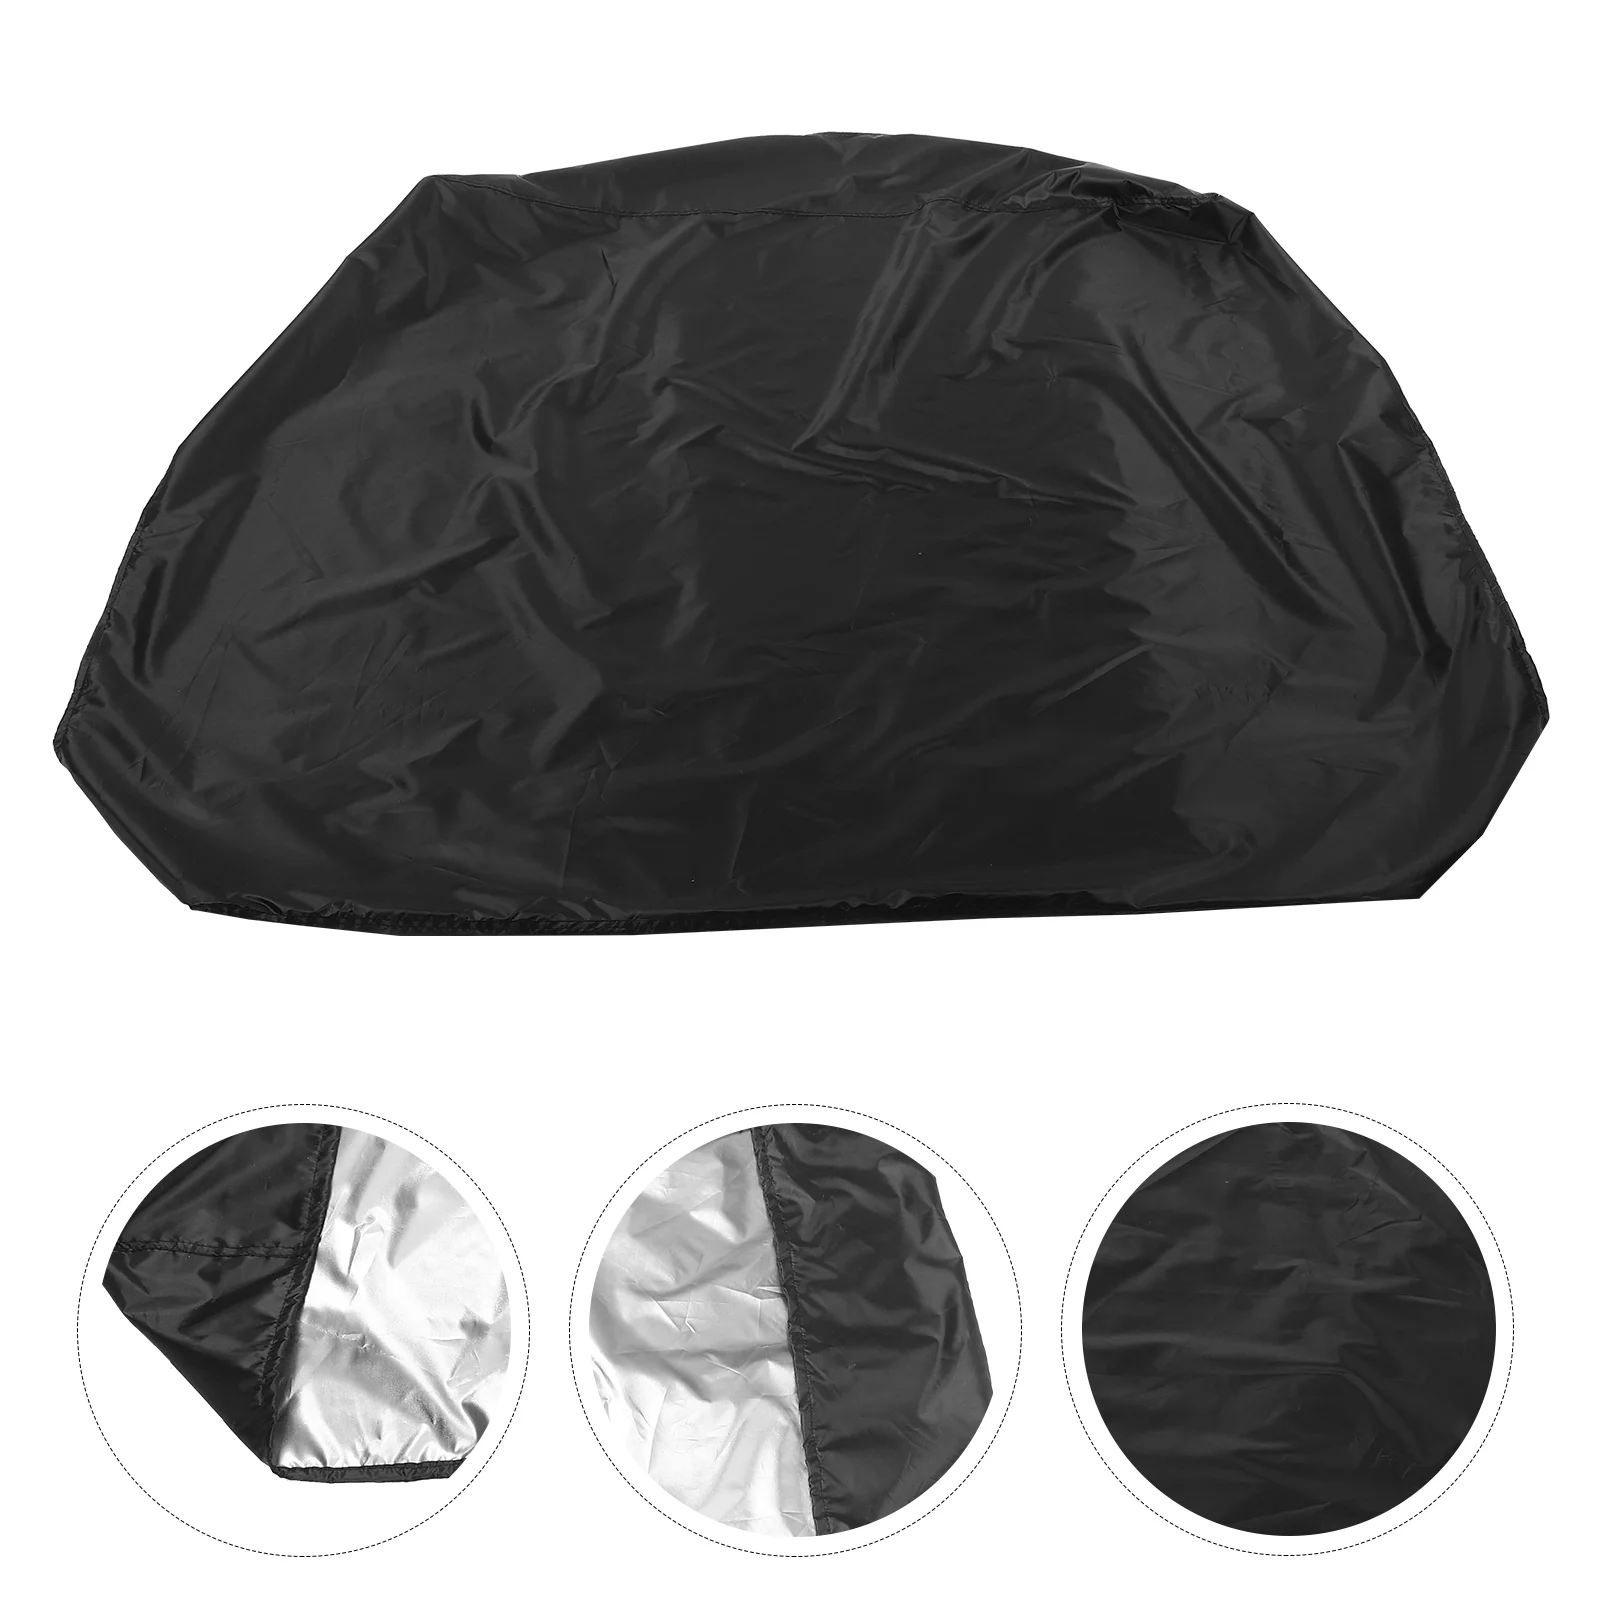 

Sandpit Cover Dustproof Sandpit Cover Waterproof Sandbox Protector with Drawstring Pool Cover with Drawstring Small Bath Cover